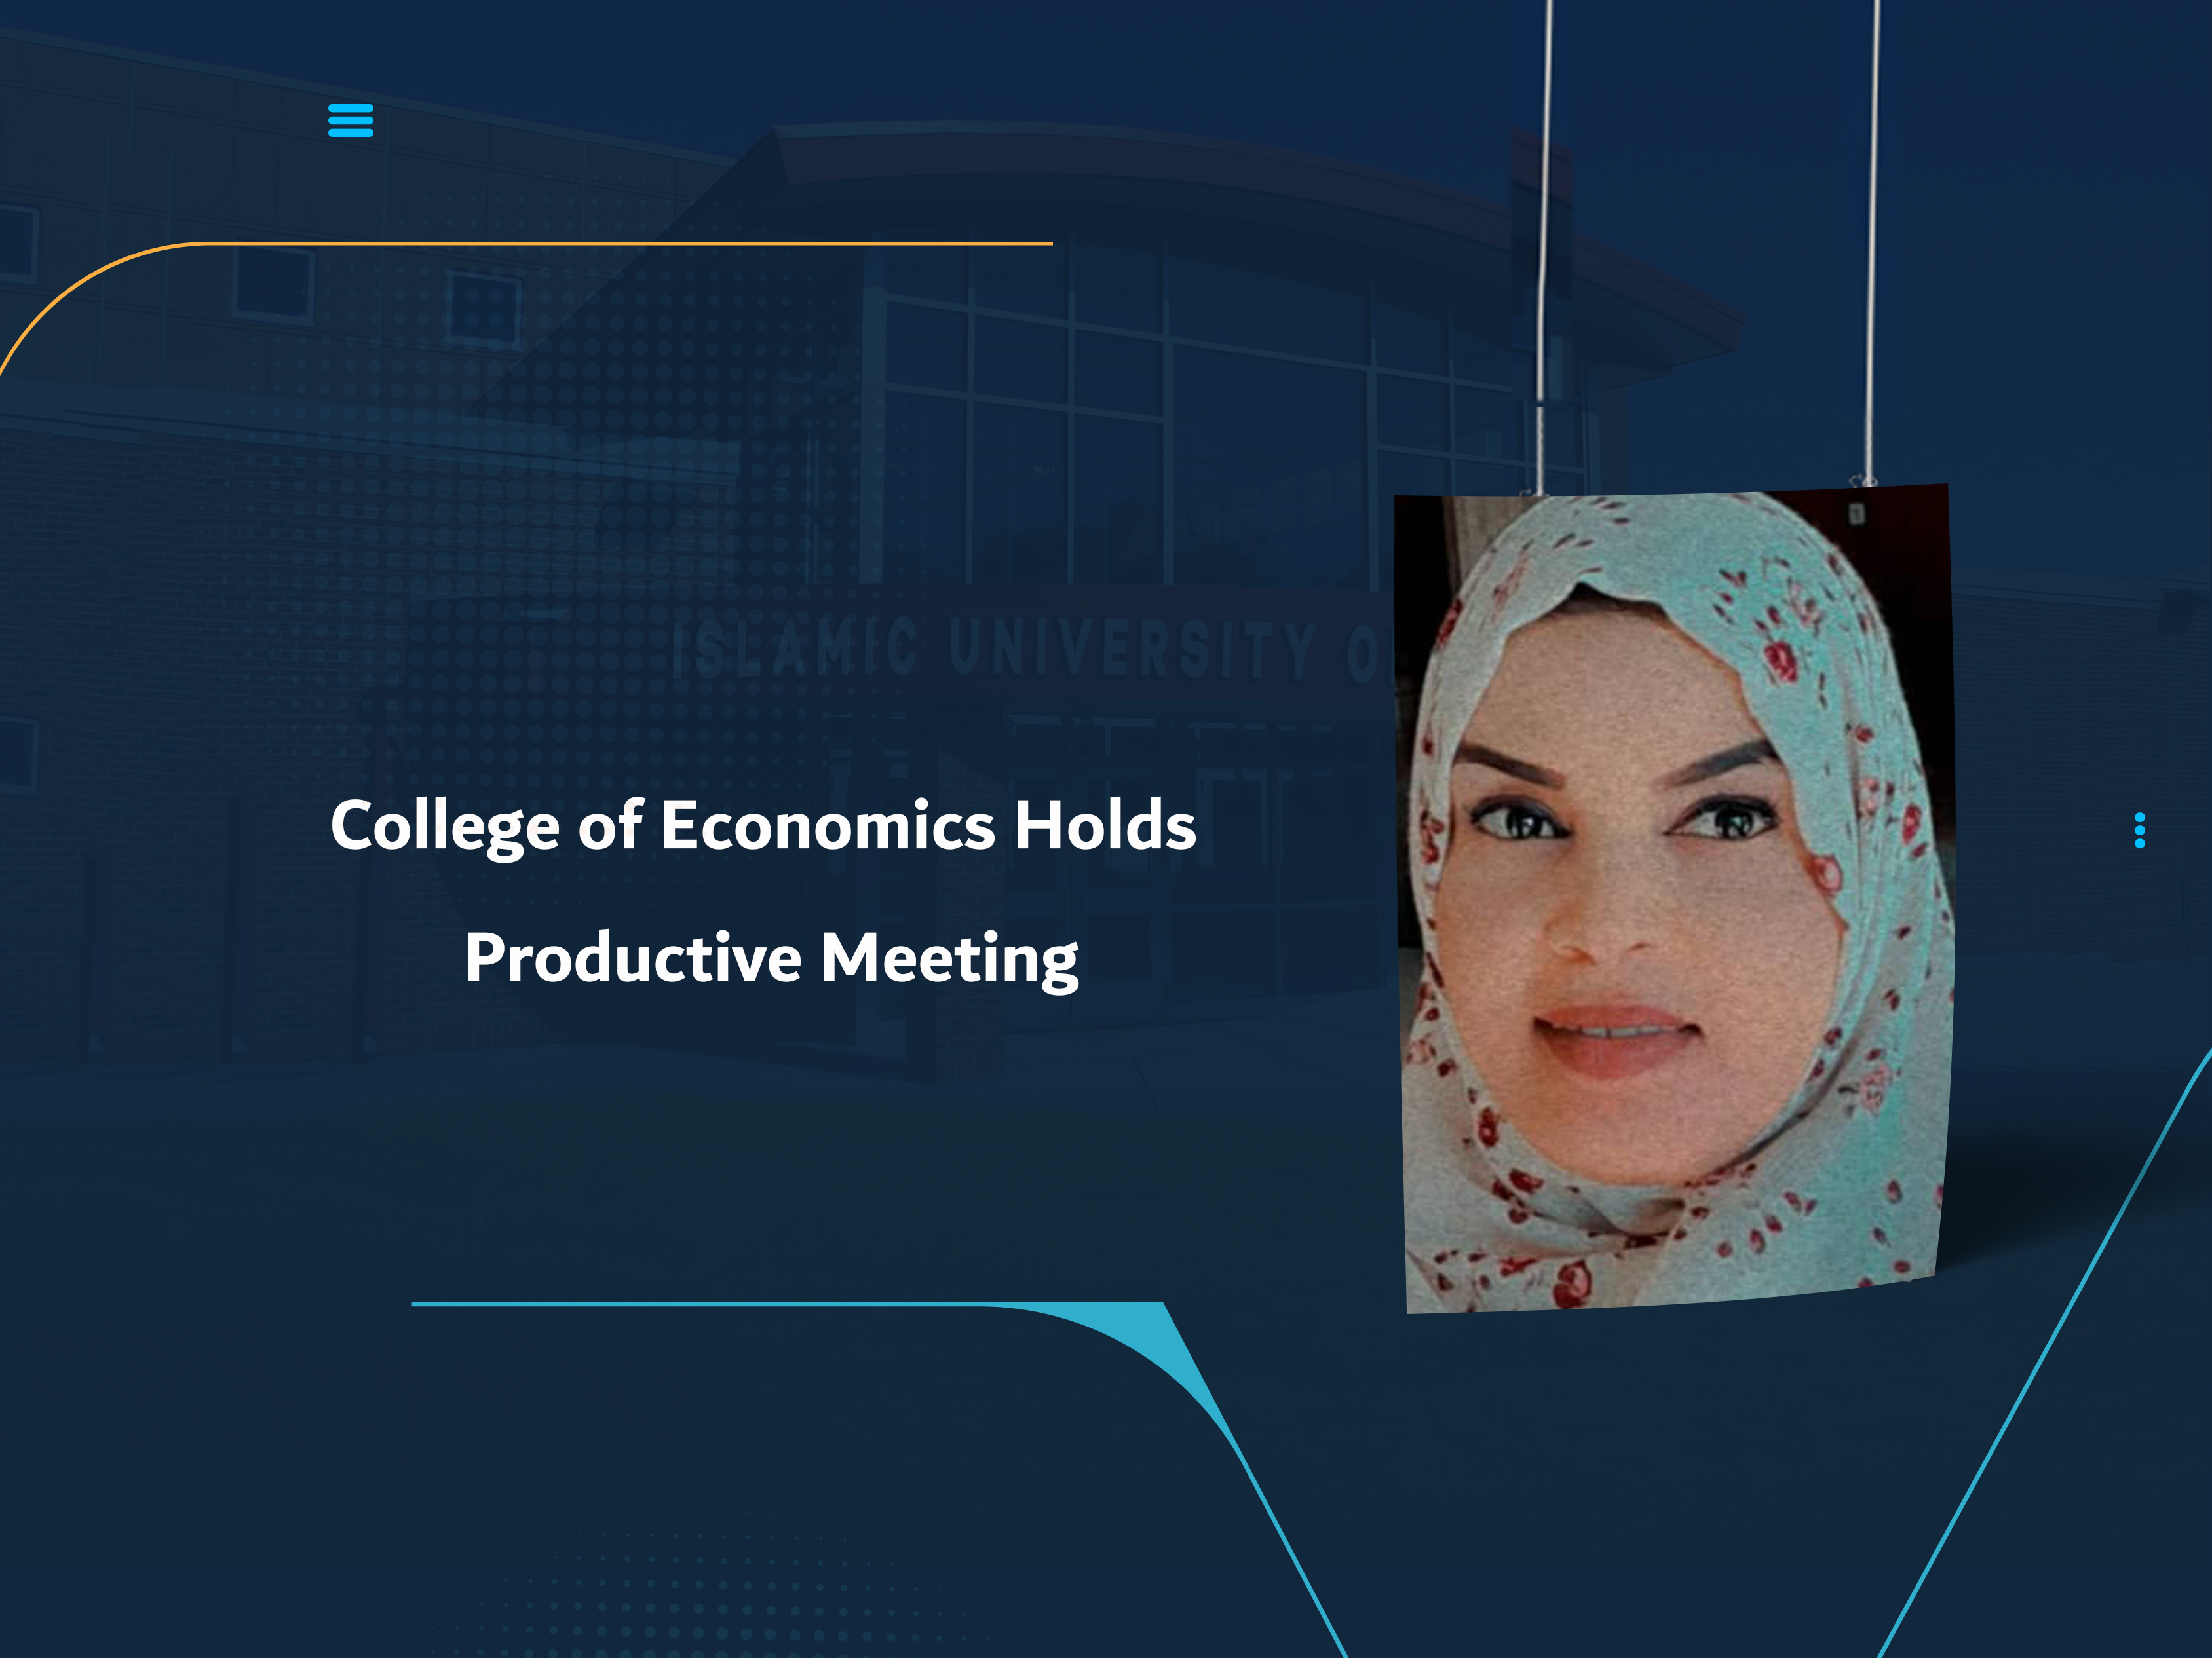 College of Economics Holds Productive Meeting